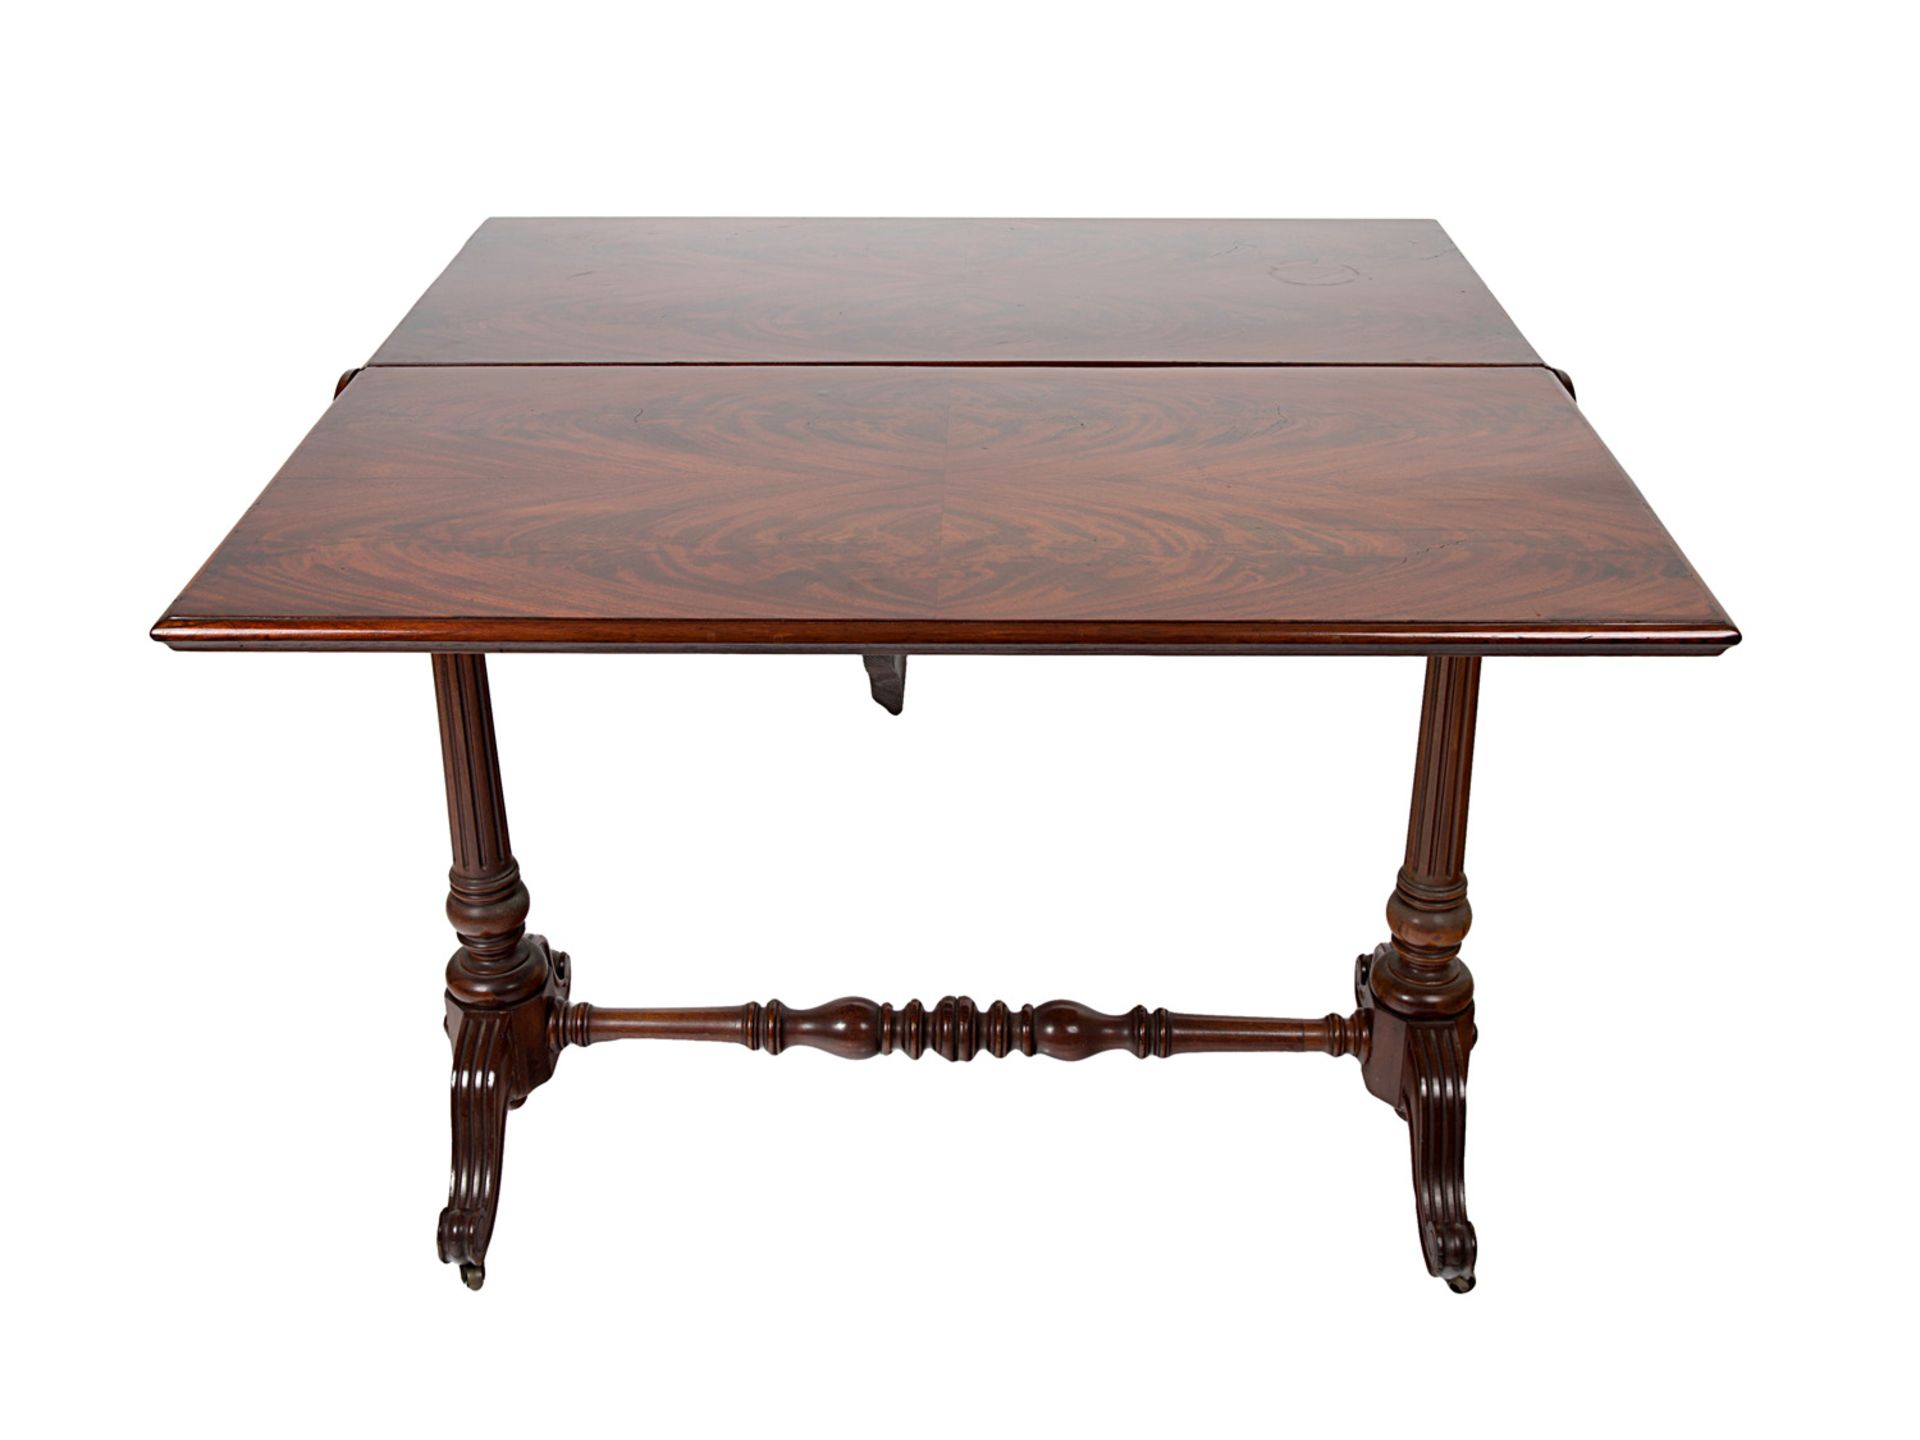 A WOODEN DINING TABLE, 19TH CENTURY